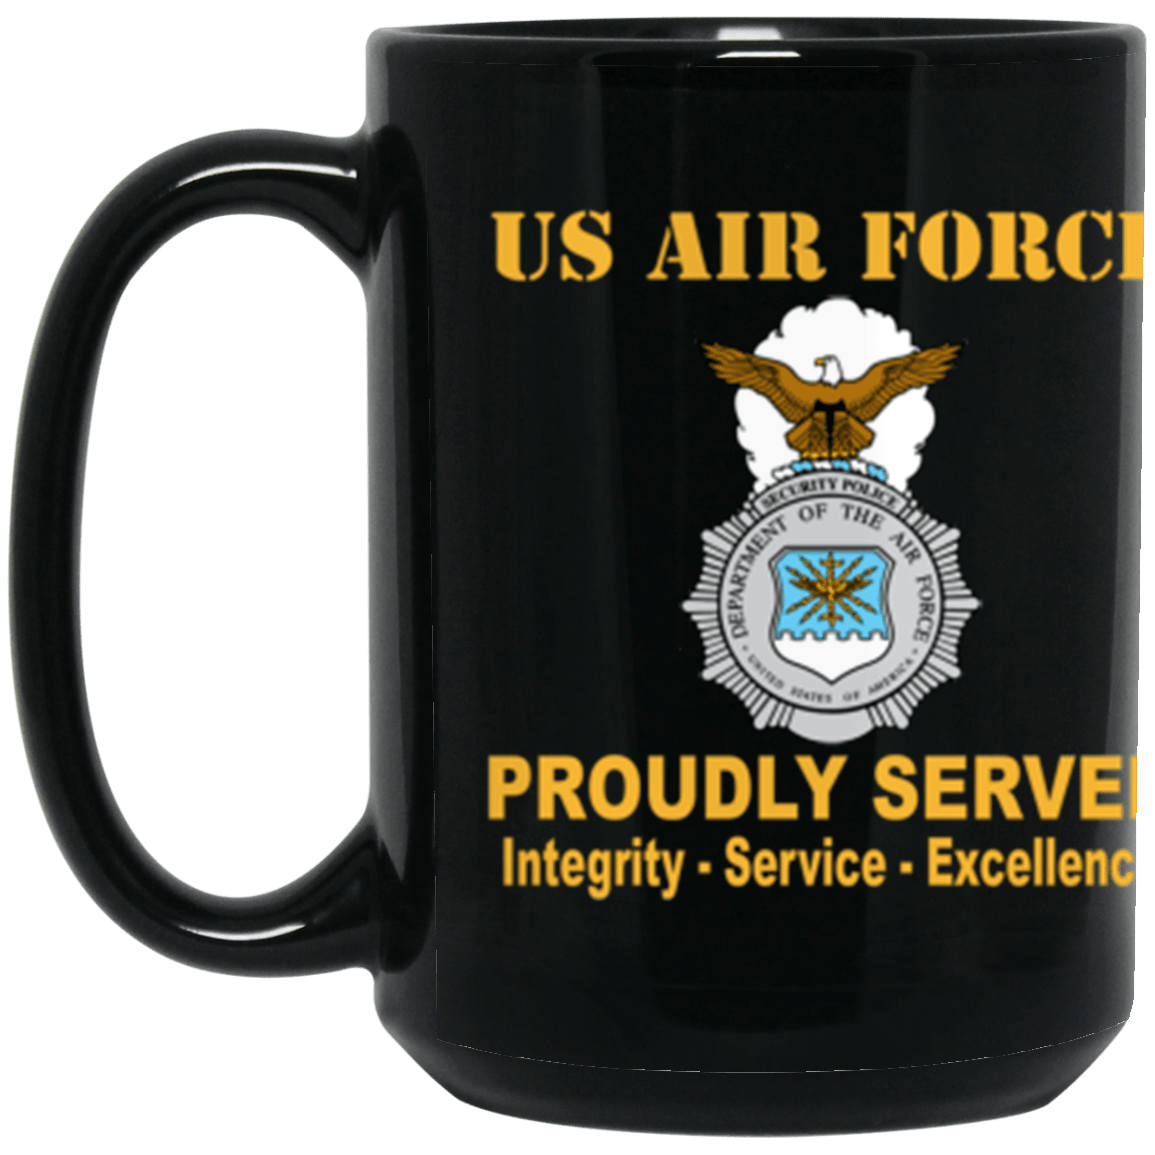 US Air Force Security Police Proudly Served Core Values 15 oz. Black Mug-Drinkware-Veterans Nation